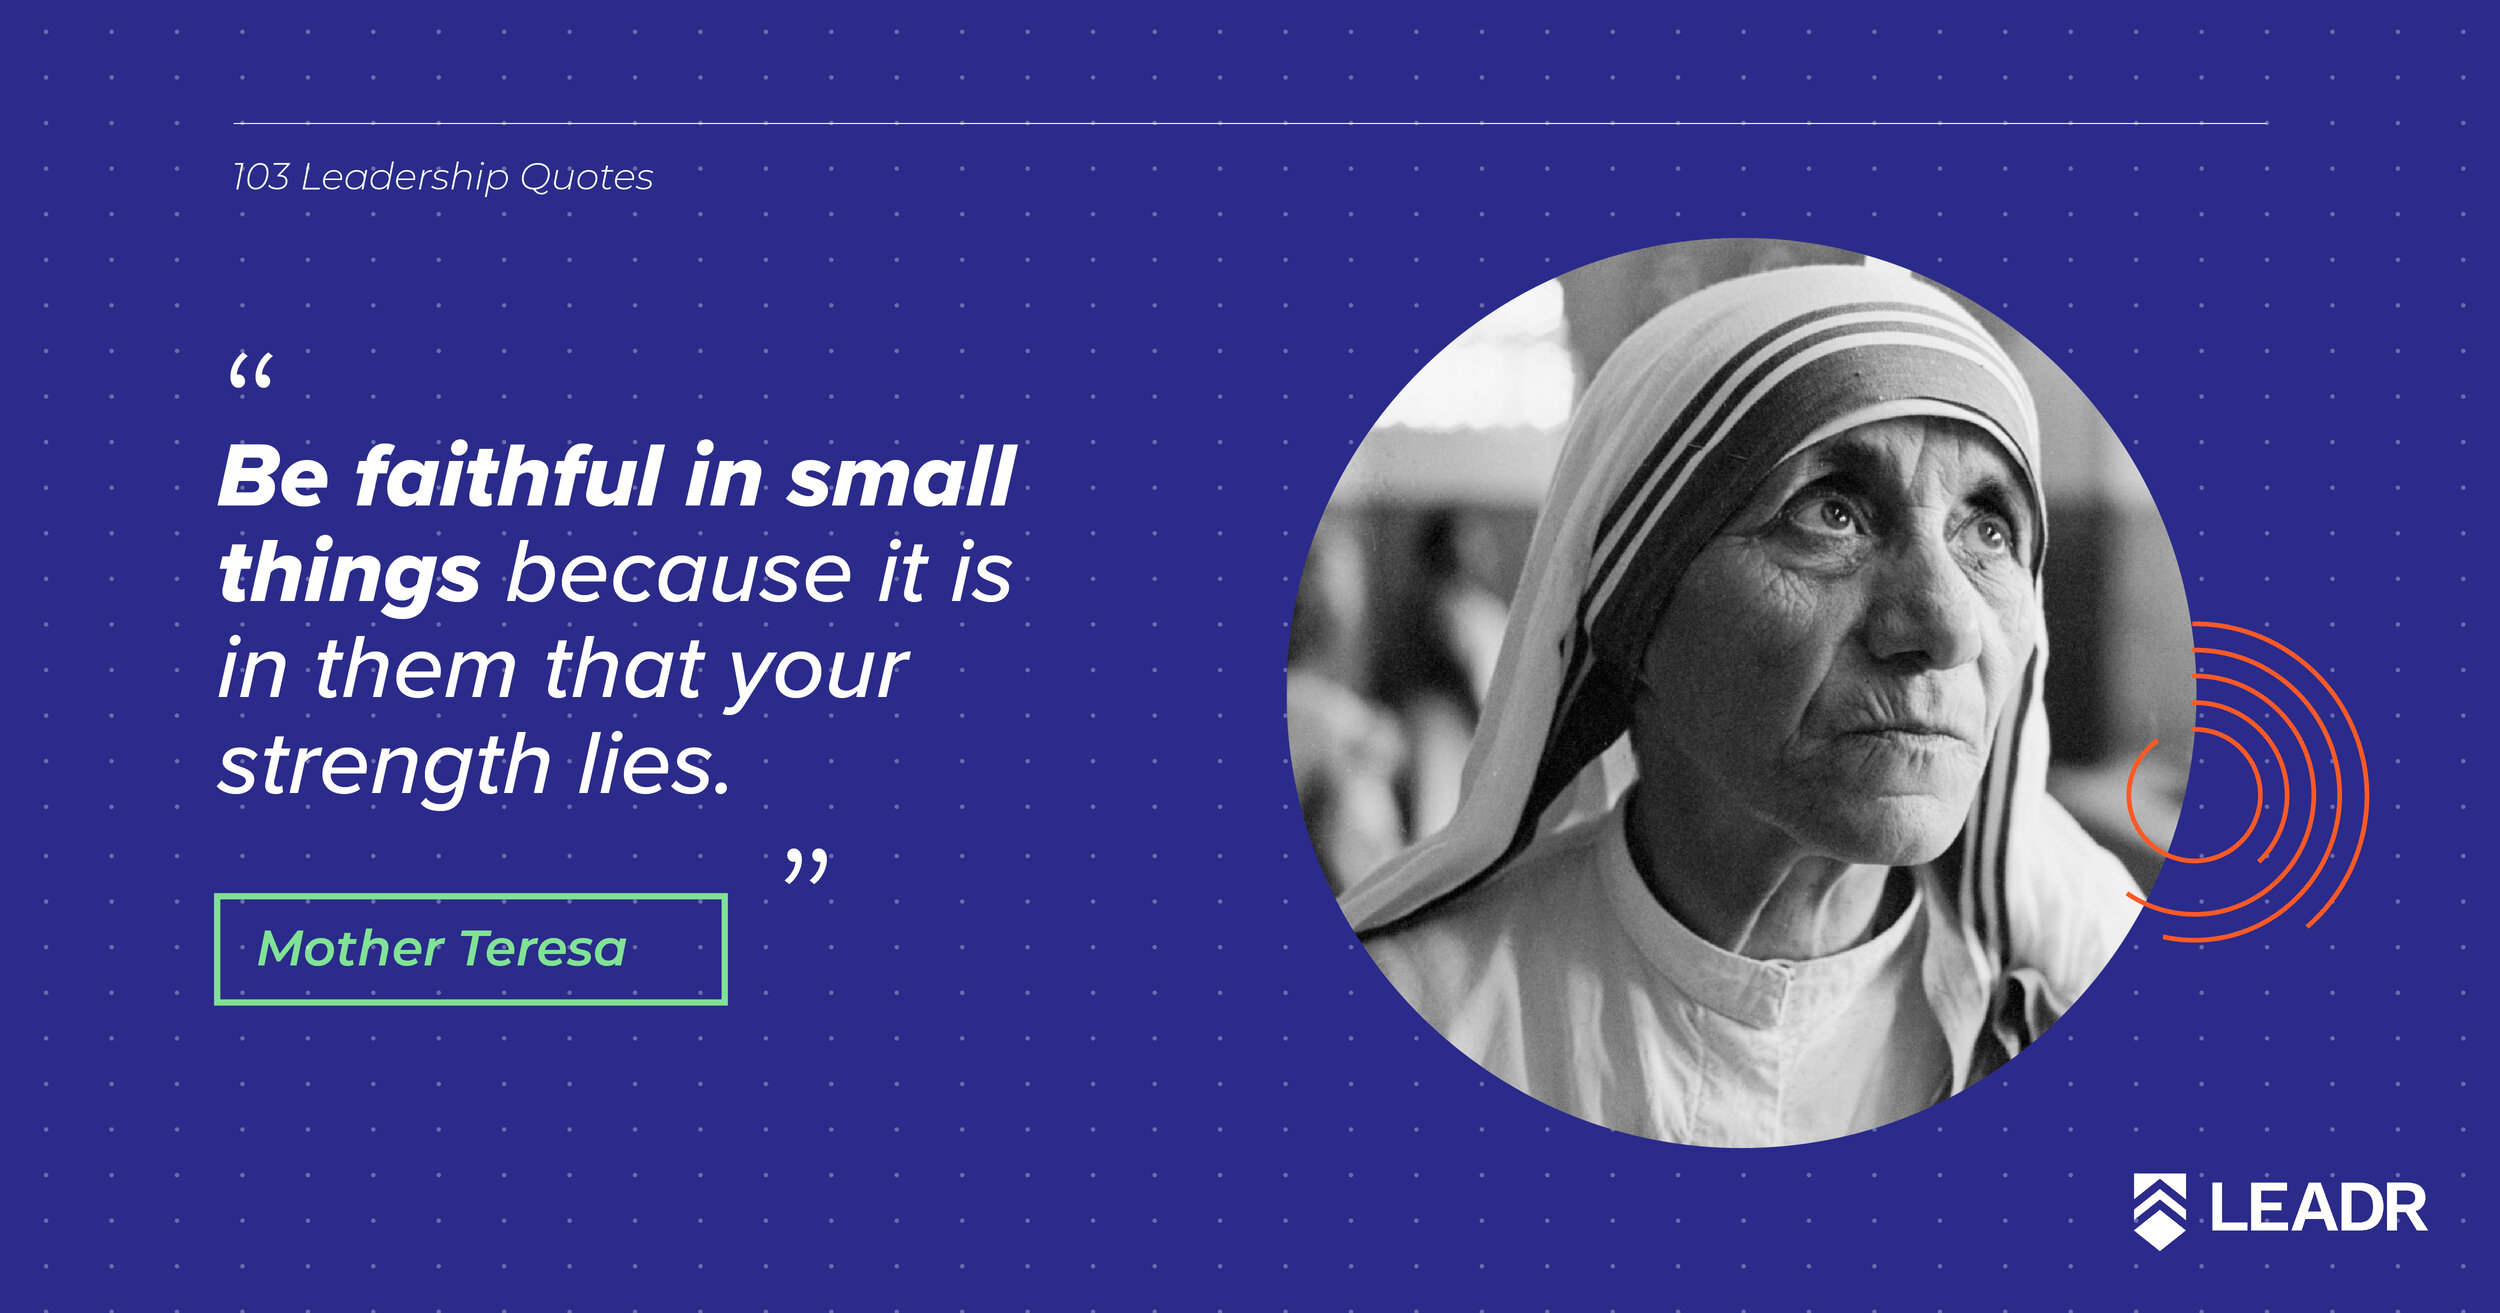 Royalty free downloadable leadership quotes - Mother Teresa